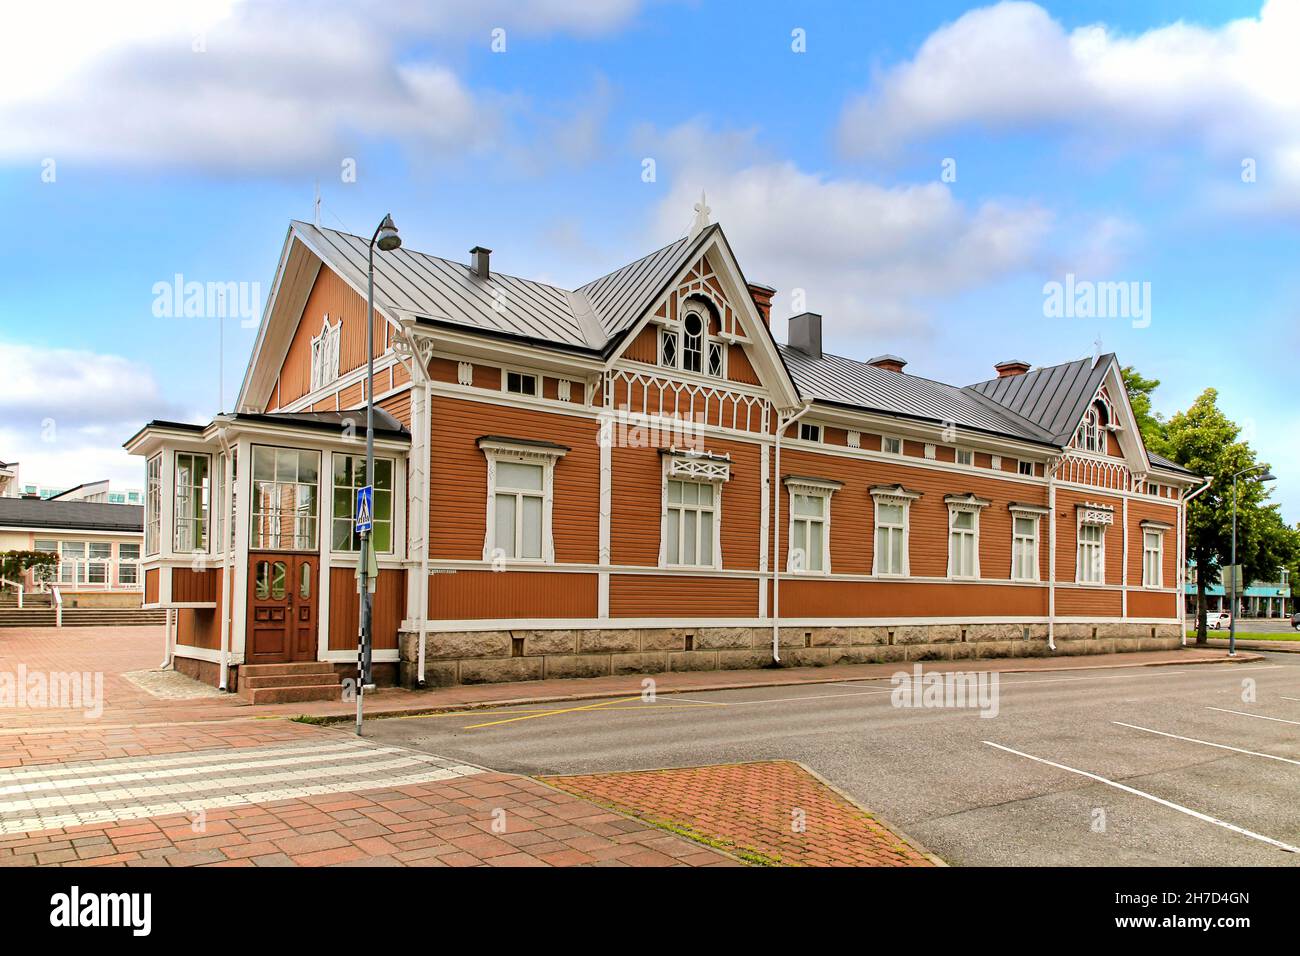 Kärki building or Kärjen talo, 1905, by Otto Dahl is a well known example of beautiful early 1900s wooden architecture in the town of Salo, Finland. Stock Photo